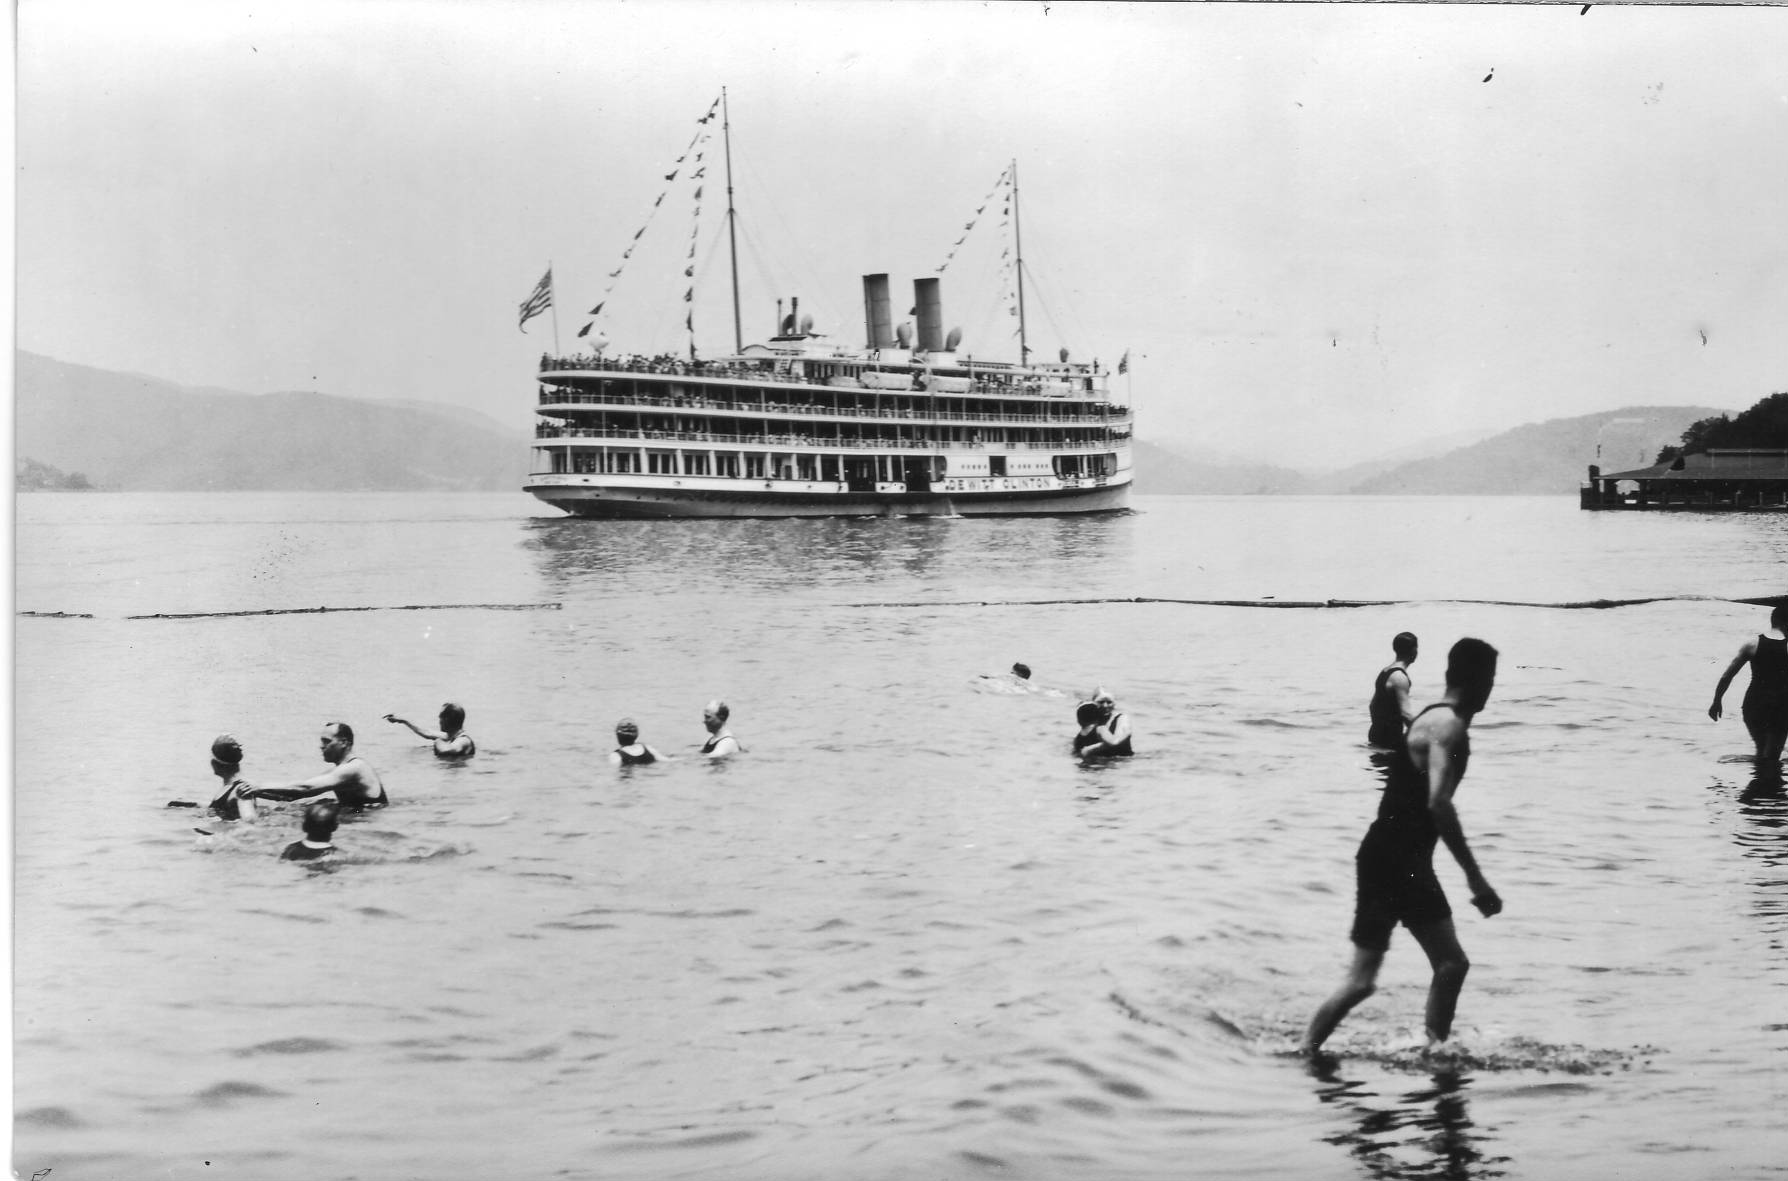 The Hudson River Day Line steamer “DeWitt Clinton” approaching the dock at Indian Point Park at Buchanan, c. 1920s. Park goers swim in the Hudson in the foreground. The Day Line built the park for its passengers. In 1962, the Indian Point Power Plant began operations at this location. The Indian Point Power Plant will close by 2021 after more than 40 years of energy production, in part due to pressure from local environmental groups who received support from New York State Governor Andrew Cuomo. It is unlik